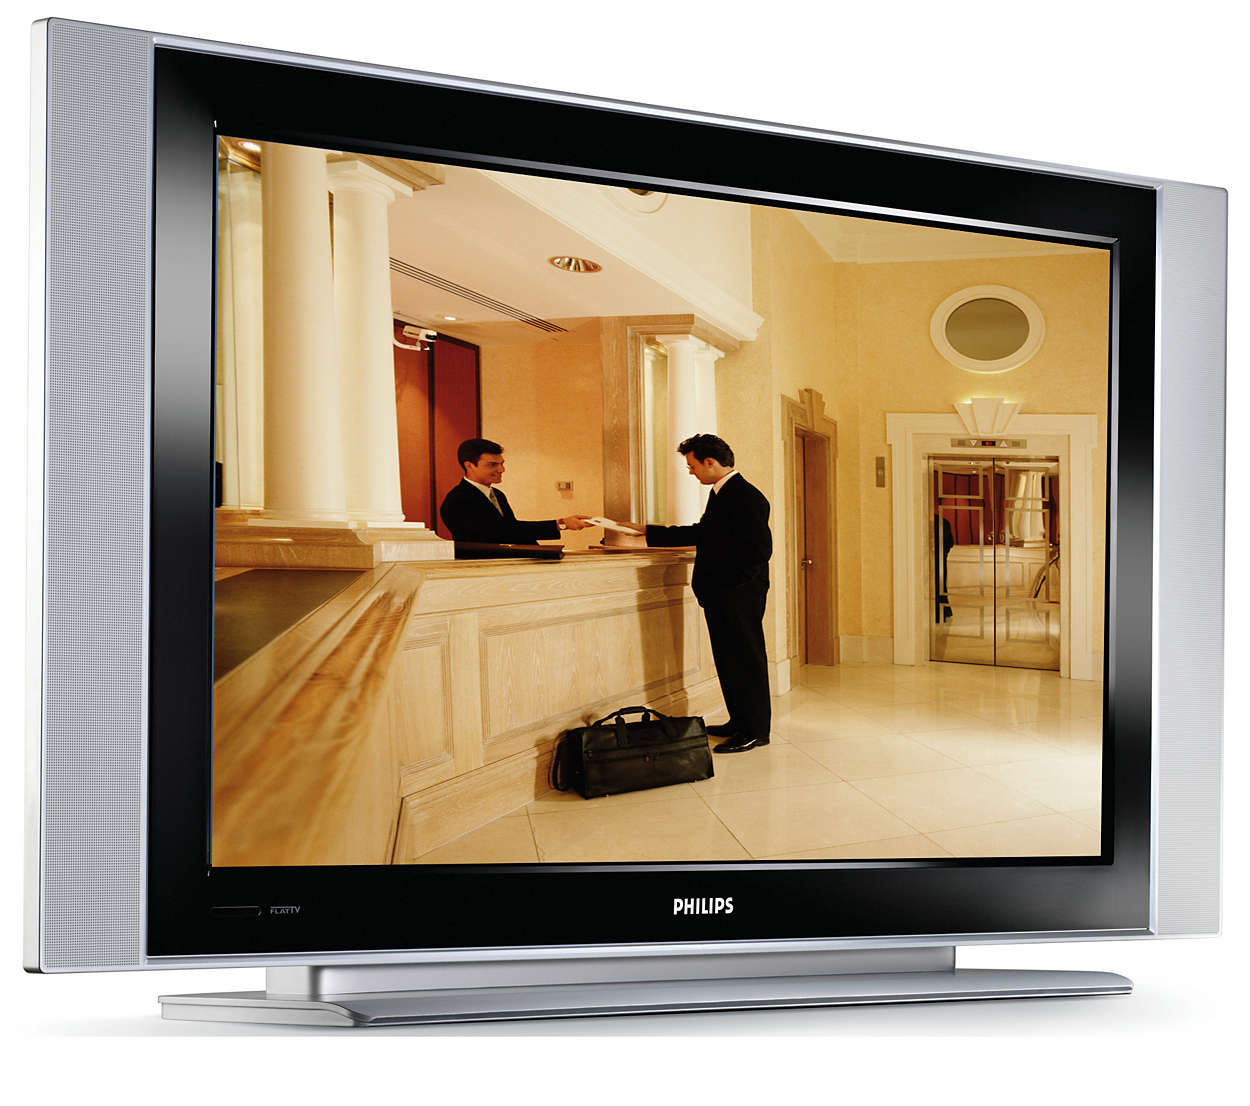 Integrated Flat LCD HDTV for entertainment